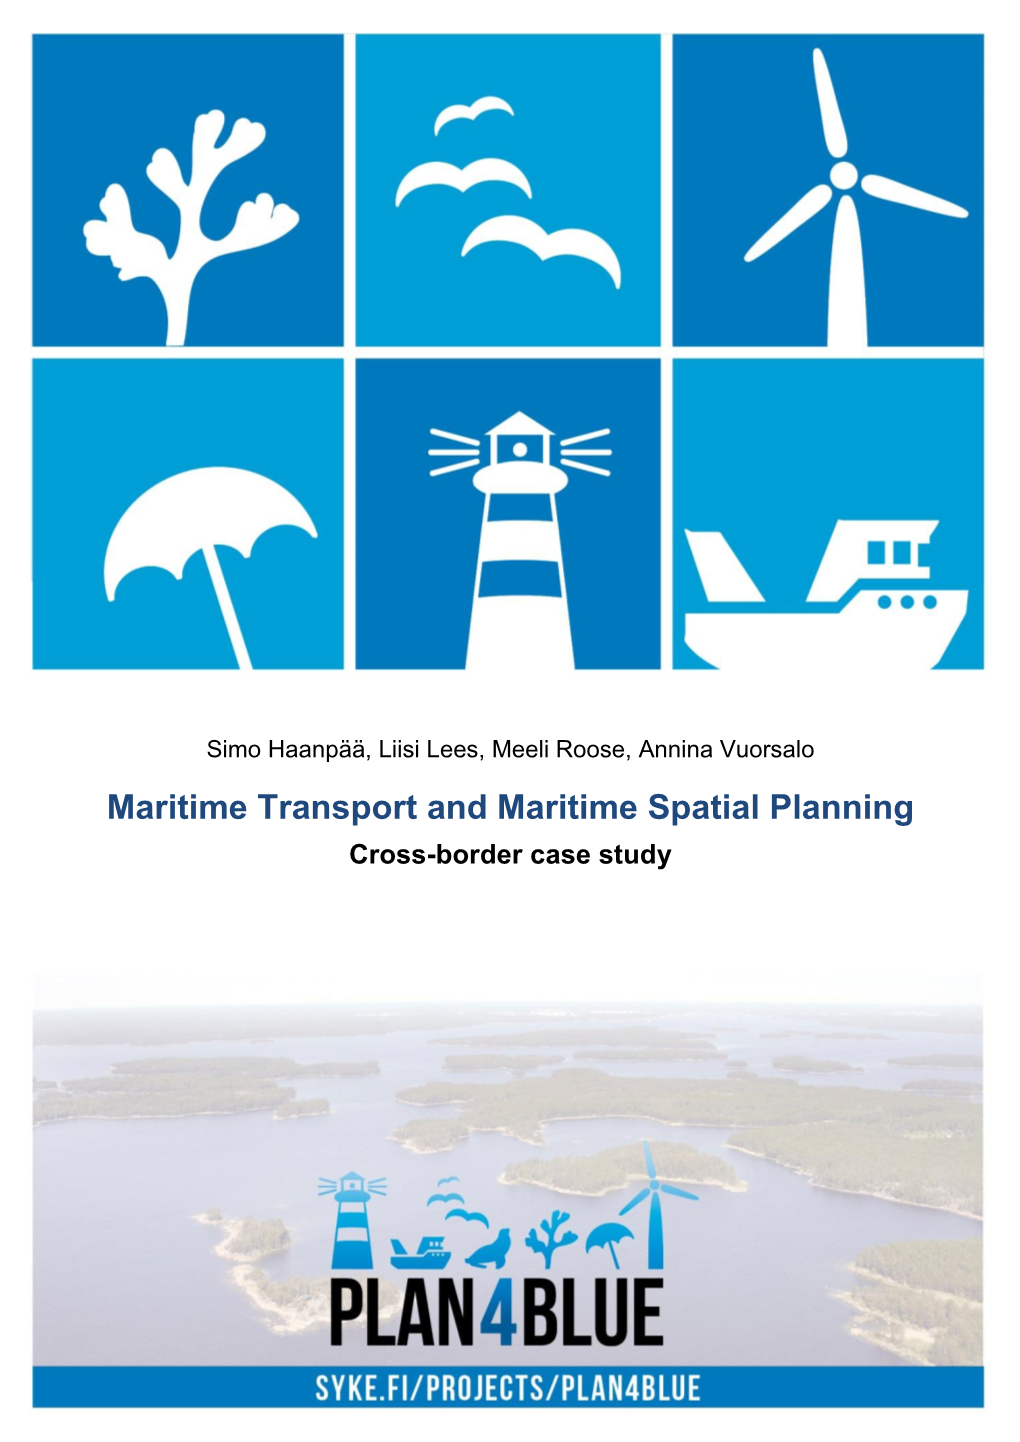 Maritime Transport and Maritime Spatial Planning Cross-Border Case Study